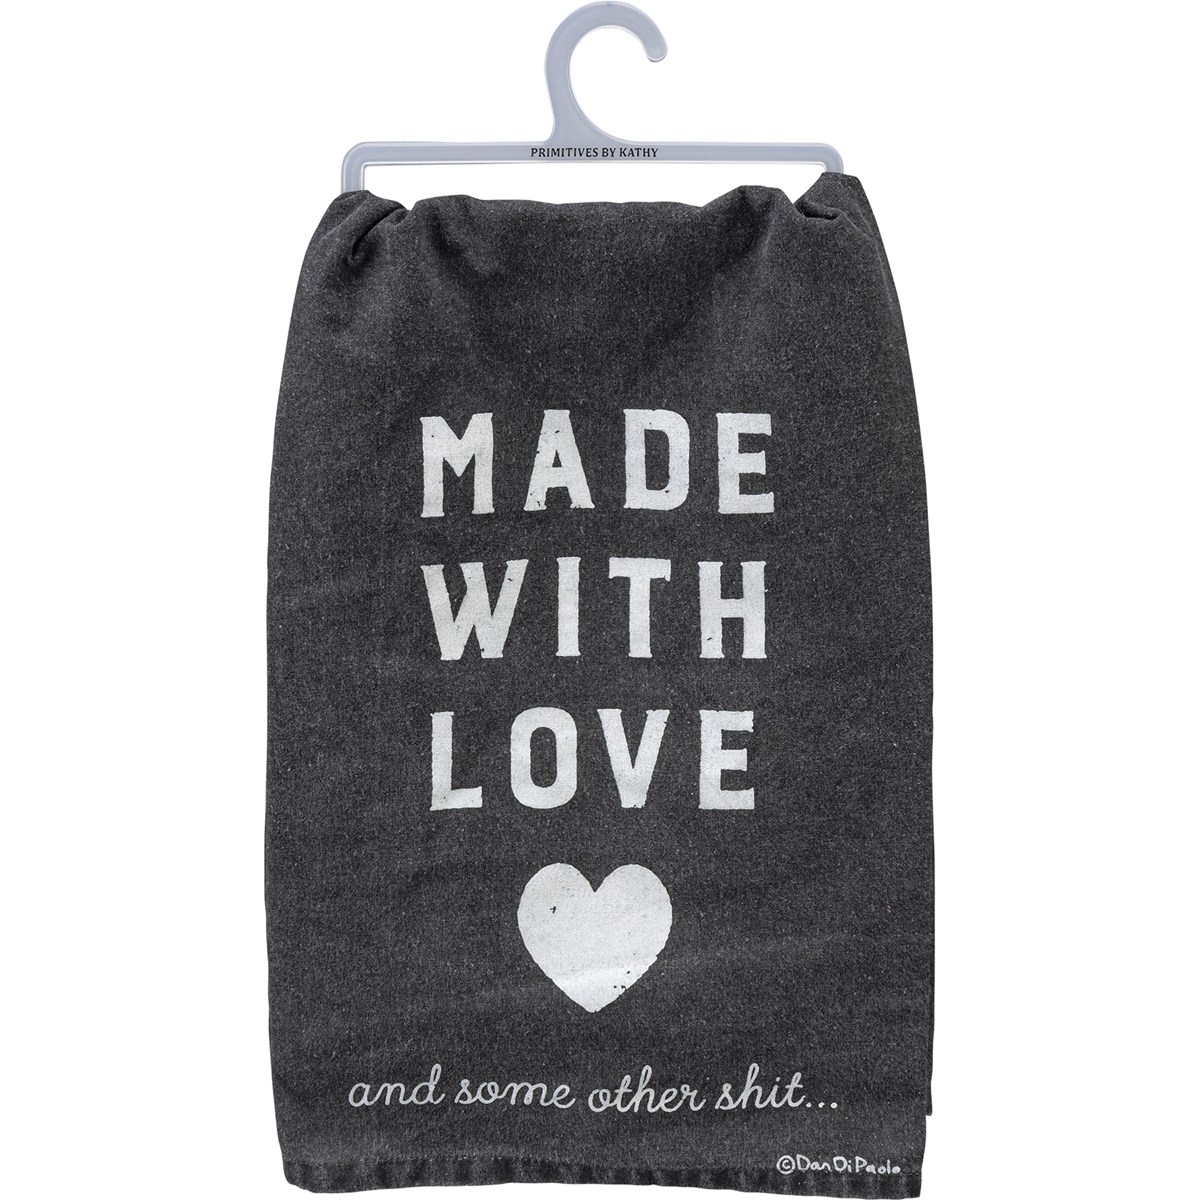 Made With Love Rustic Kitchen Towel - Cotton